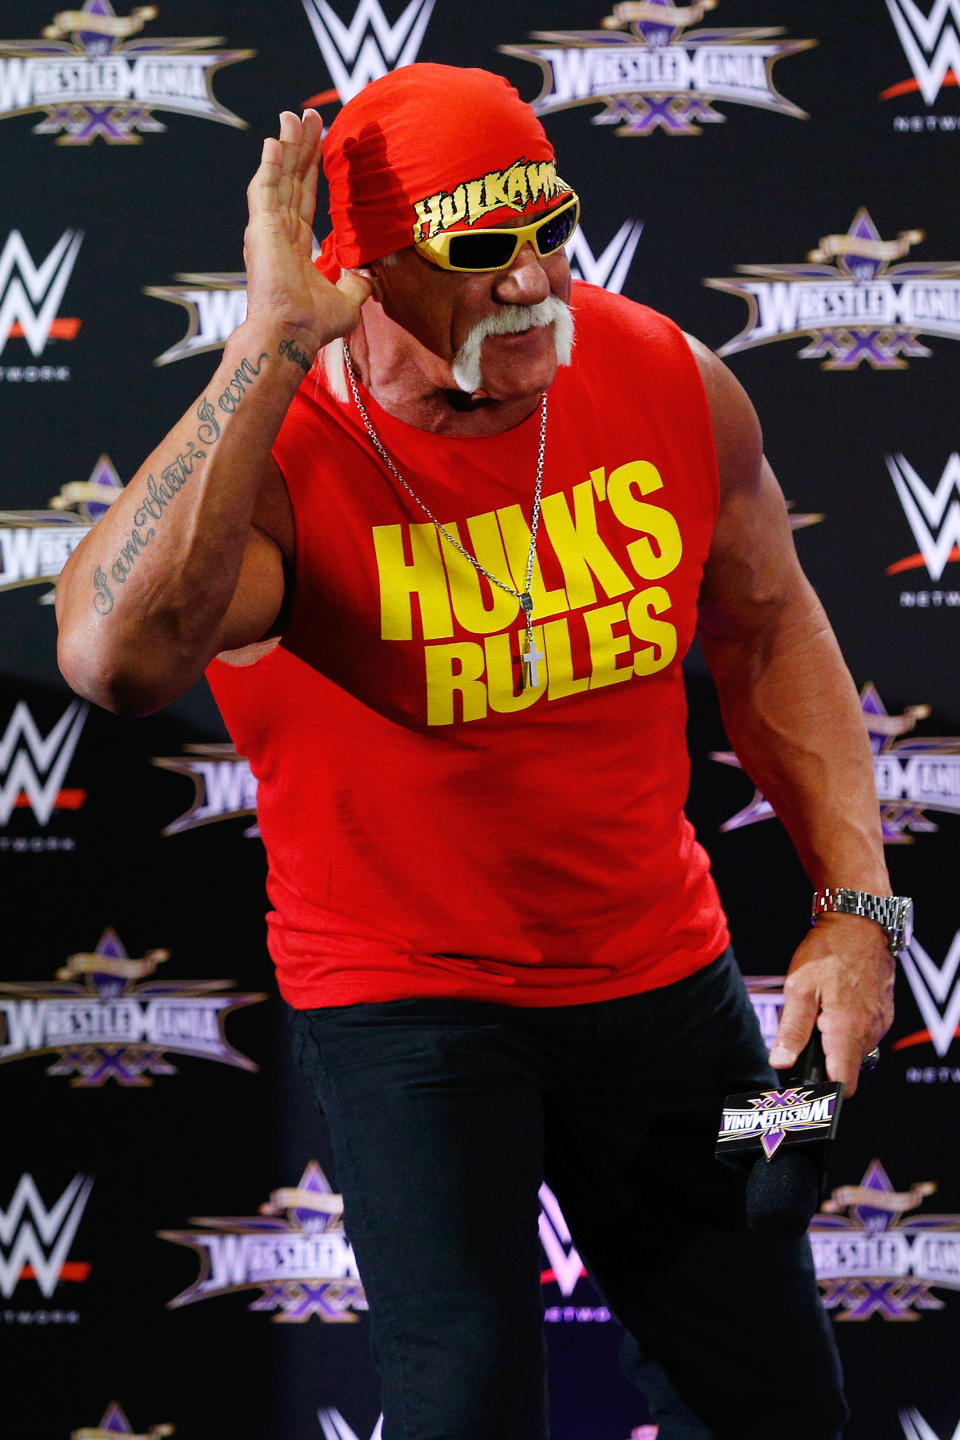 Hulk Hogan speaks during a news conference before Wrestlemania XXX at the Mercedes-Benz Super Dome in New Orleans on Sunday, April 6, 2014. (Jonathan Bachman/AP Images for WWE)